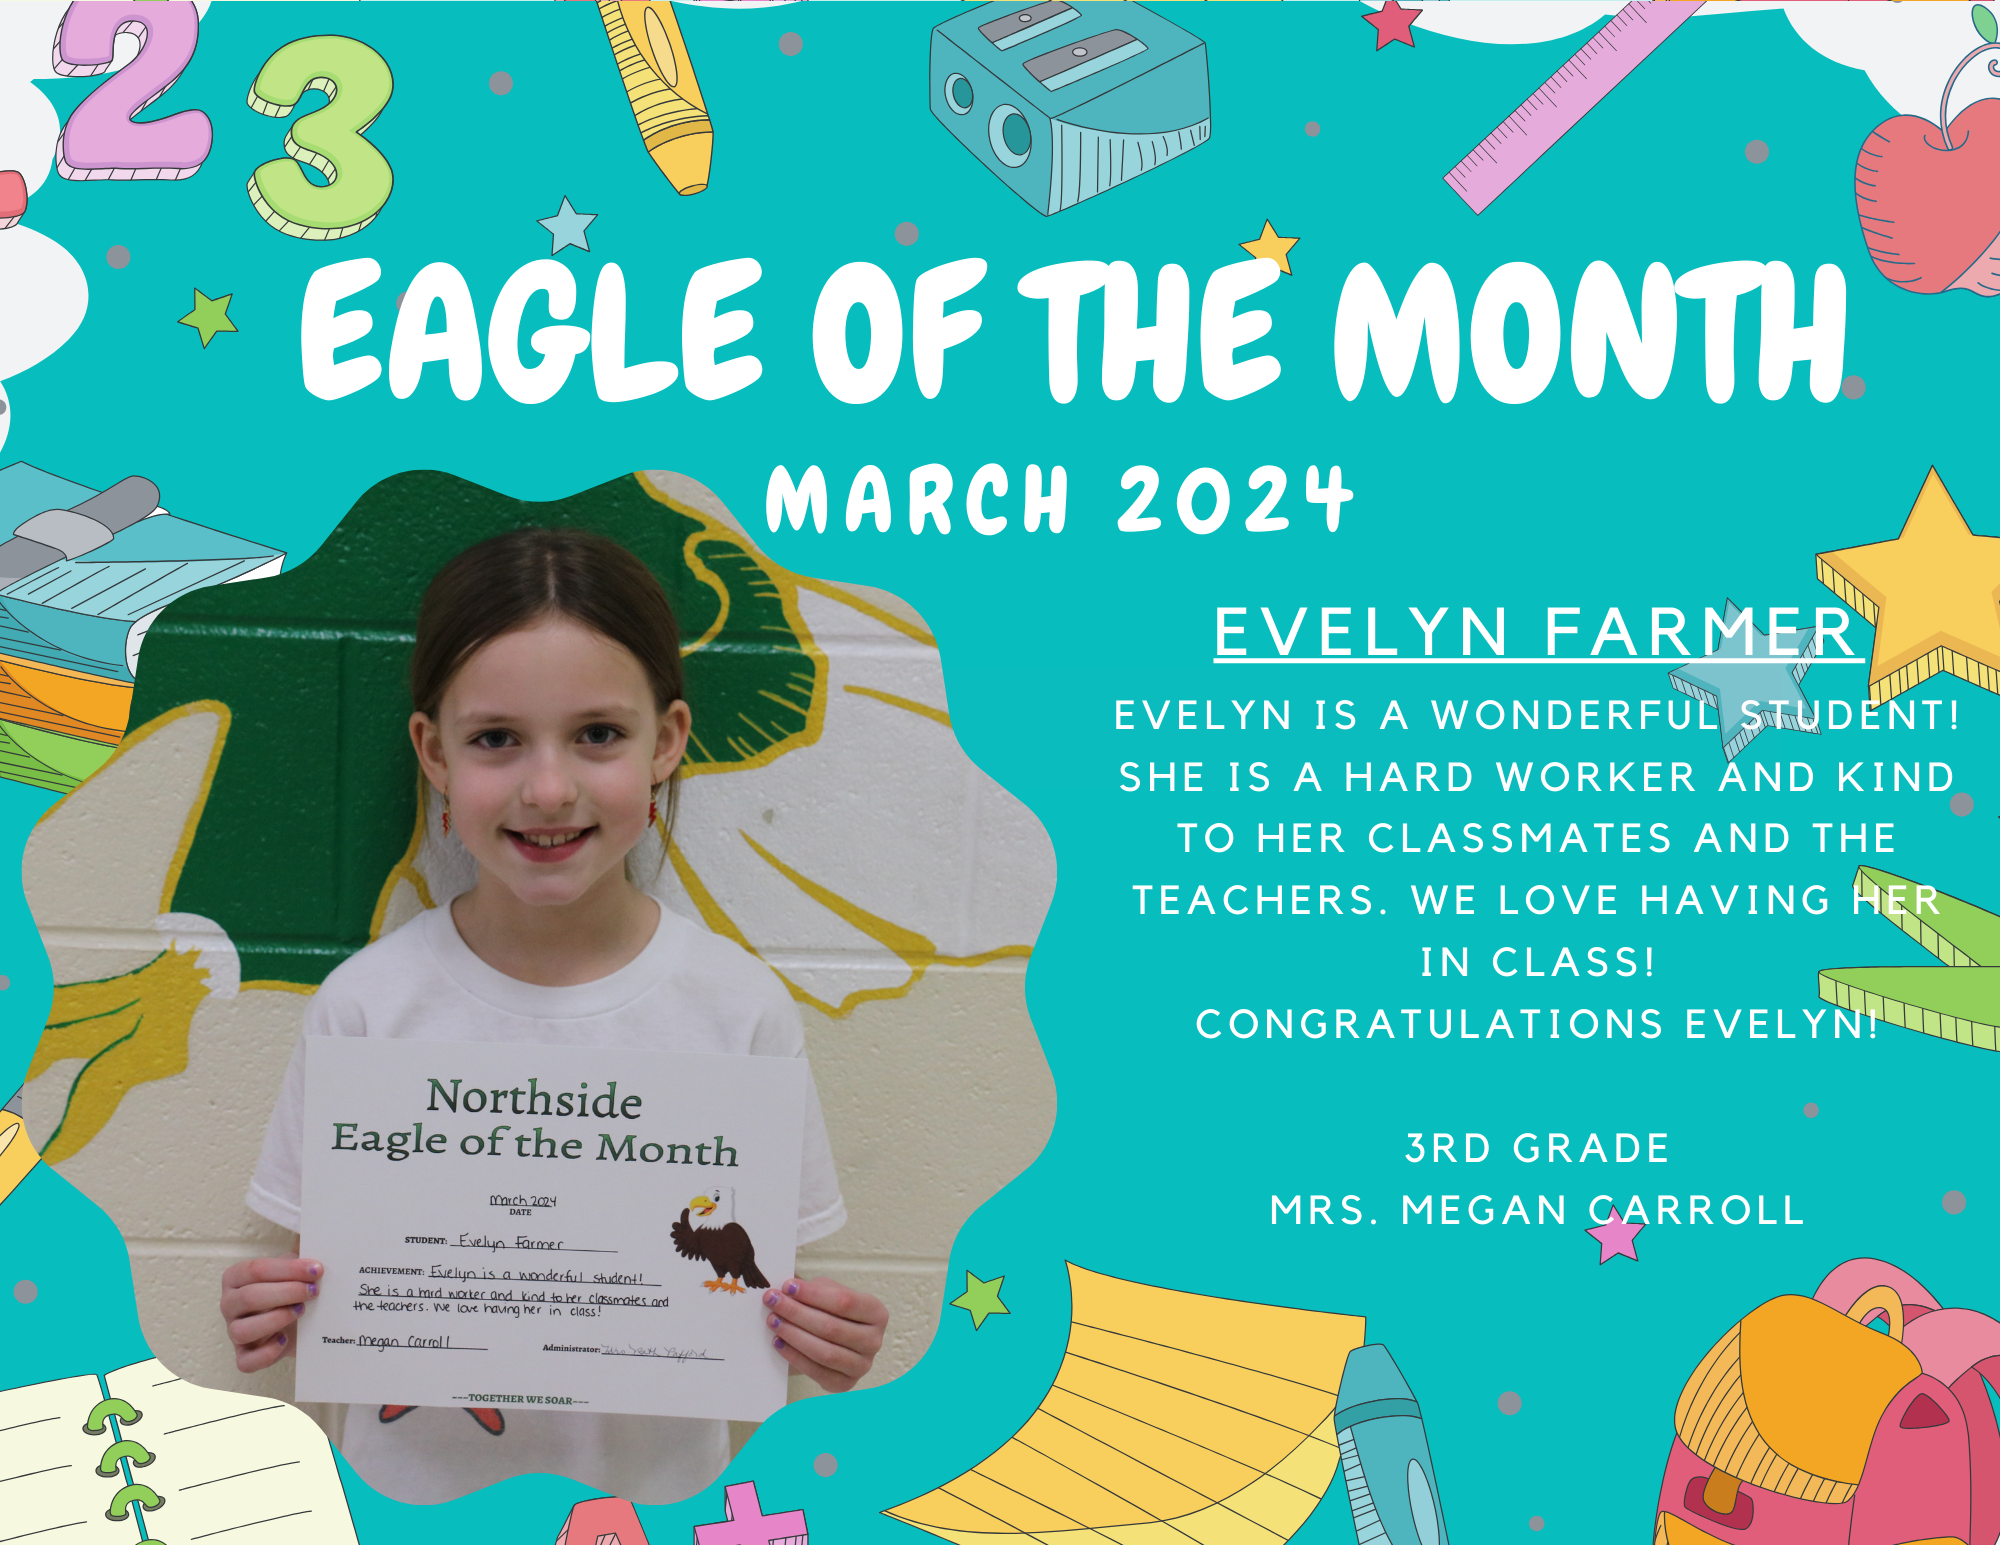 Eagle of the Month Evelyn Farmer